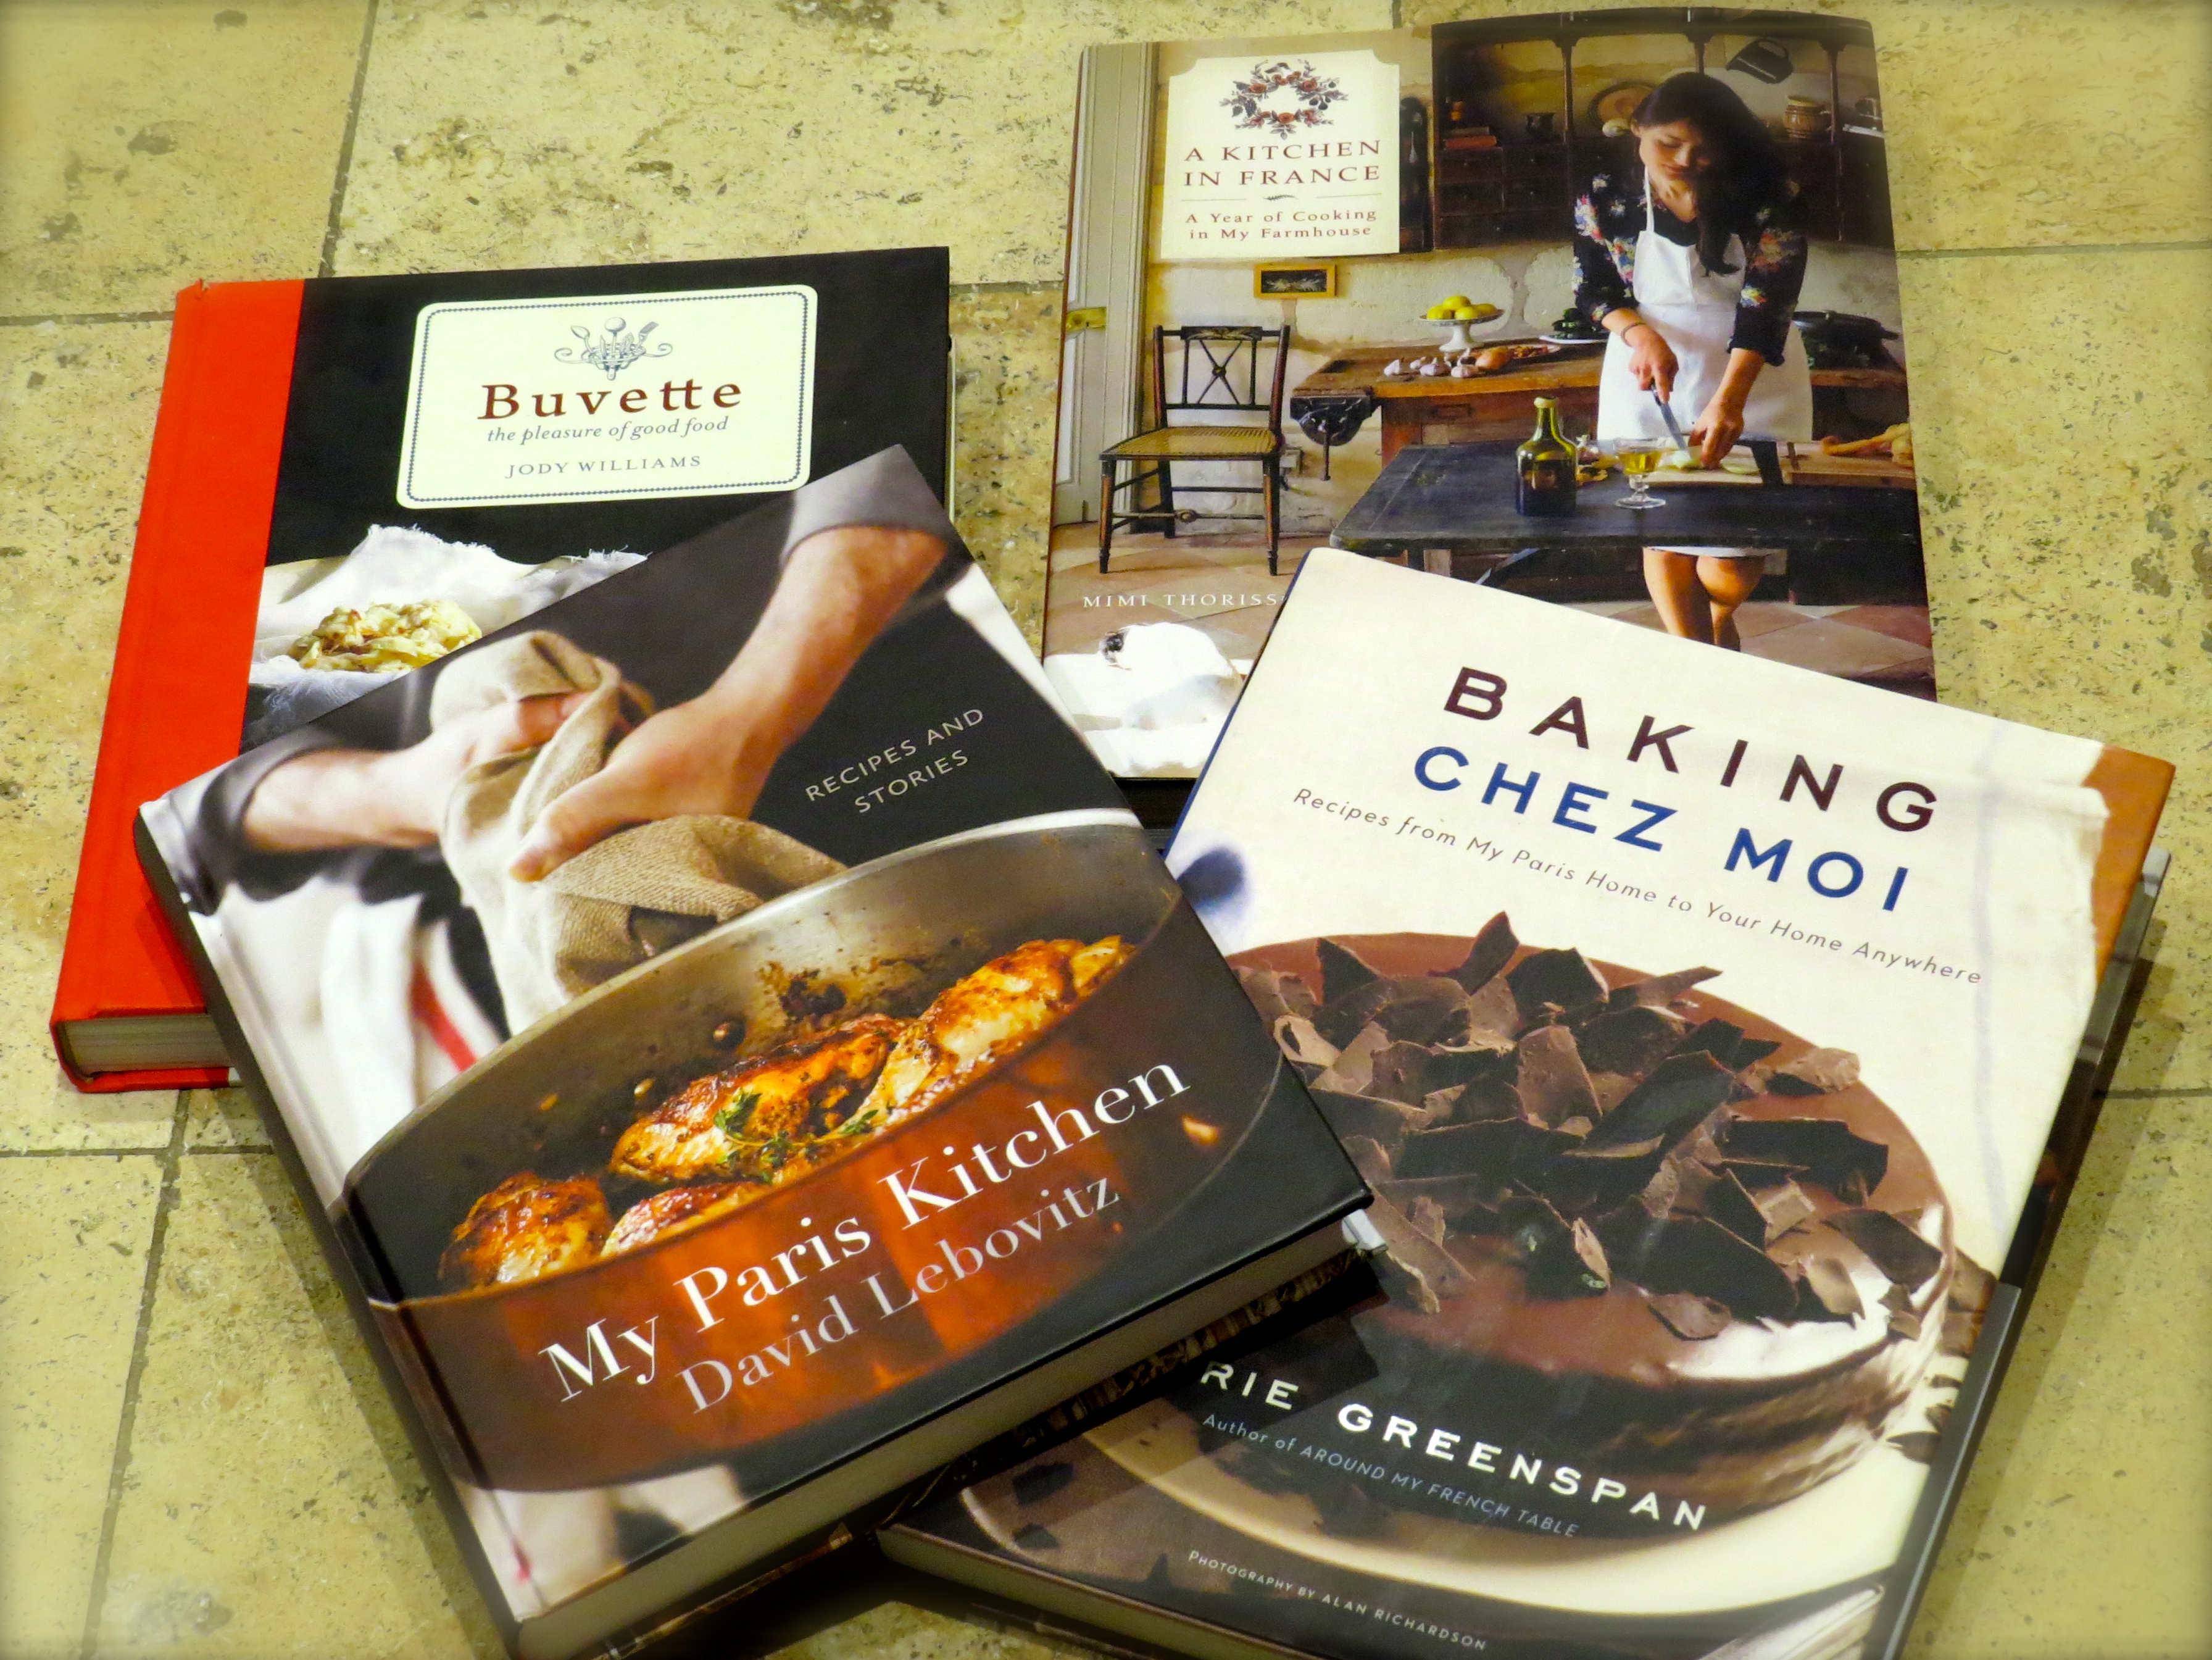 Of the 16 chosen 2015 cookbooks, I had recently purchased 4 but was not even aware of the others. That's why I love this competition.  